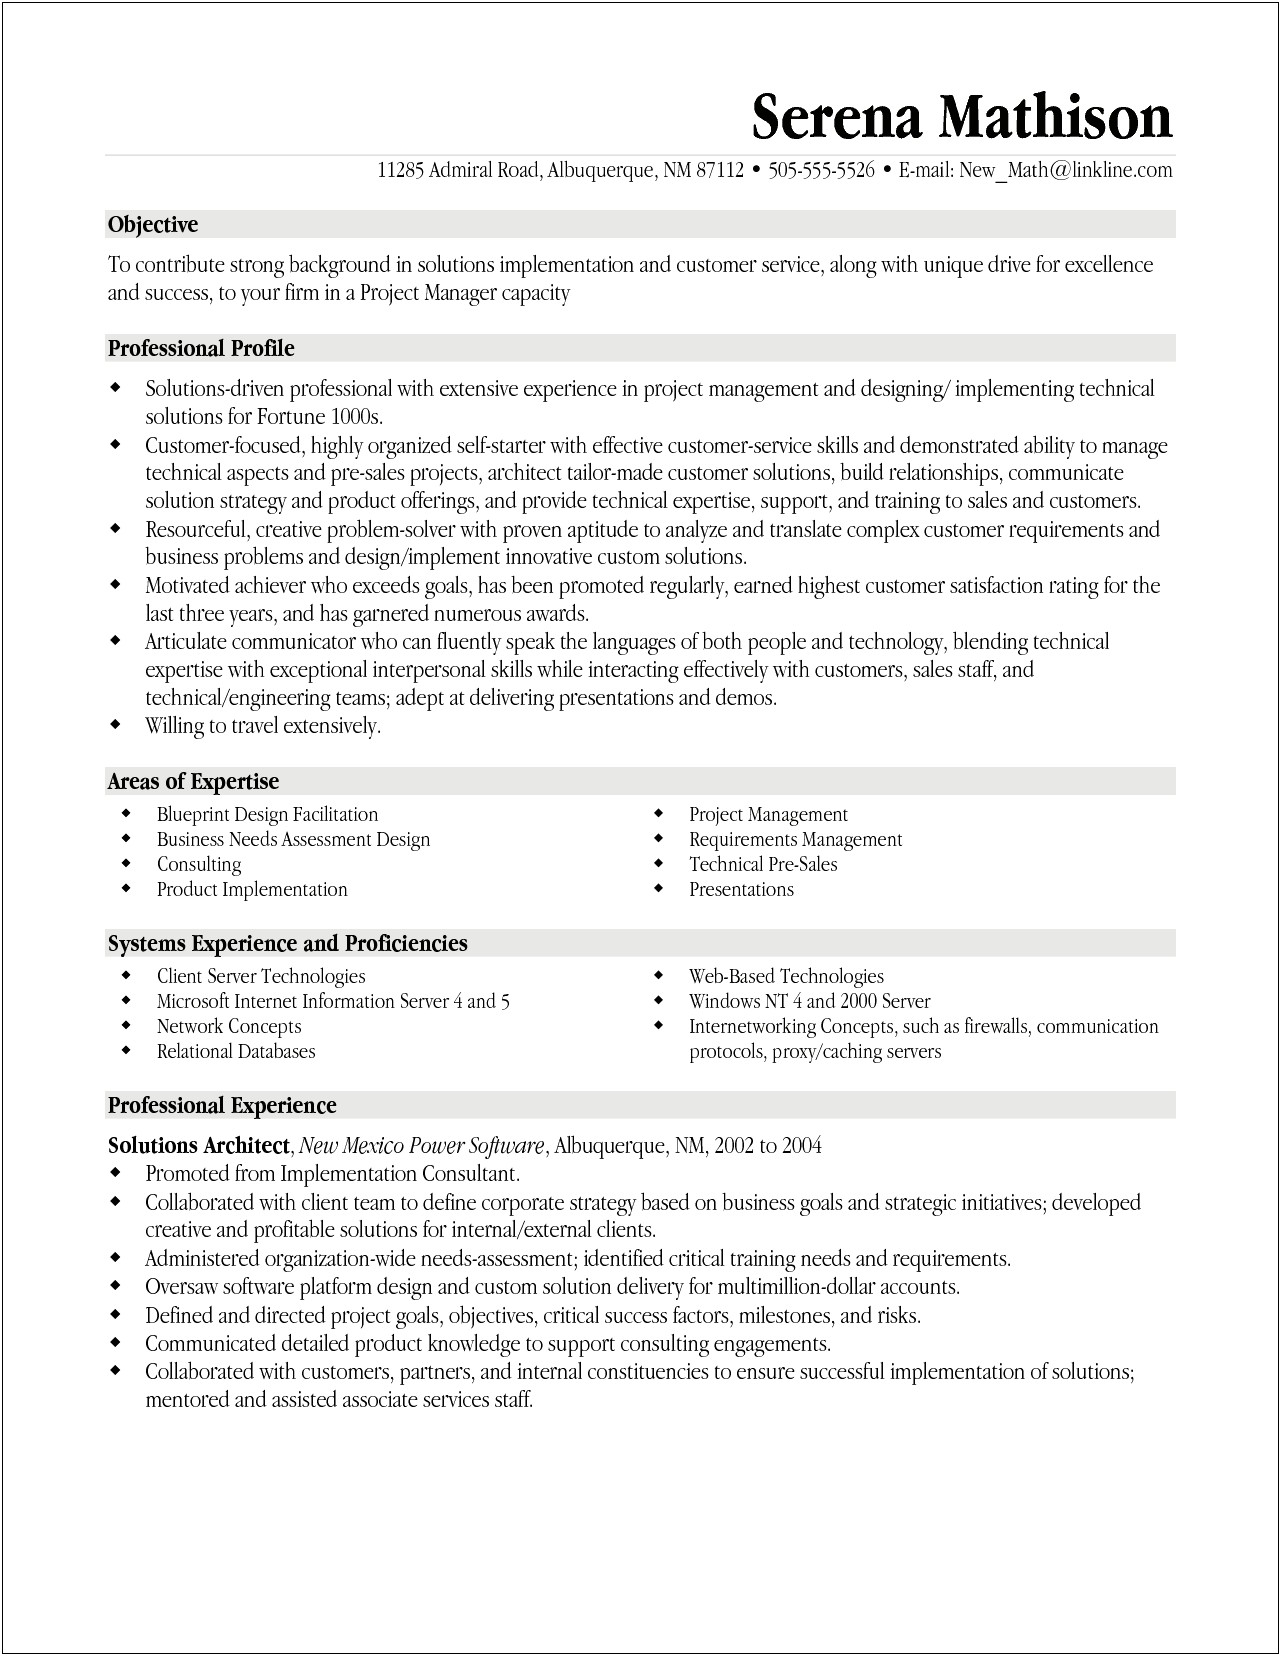 Resume Career Objective Project Manager